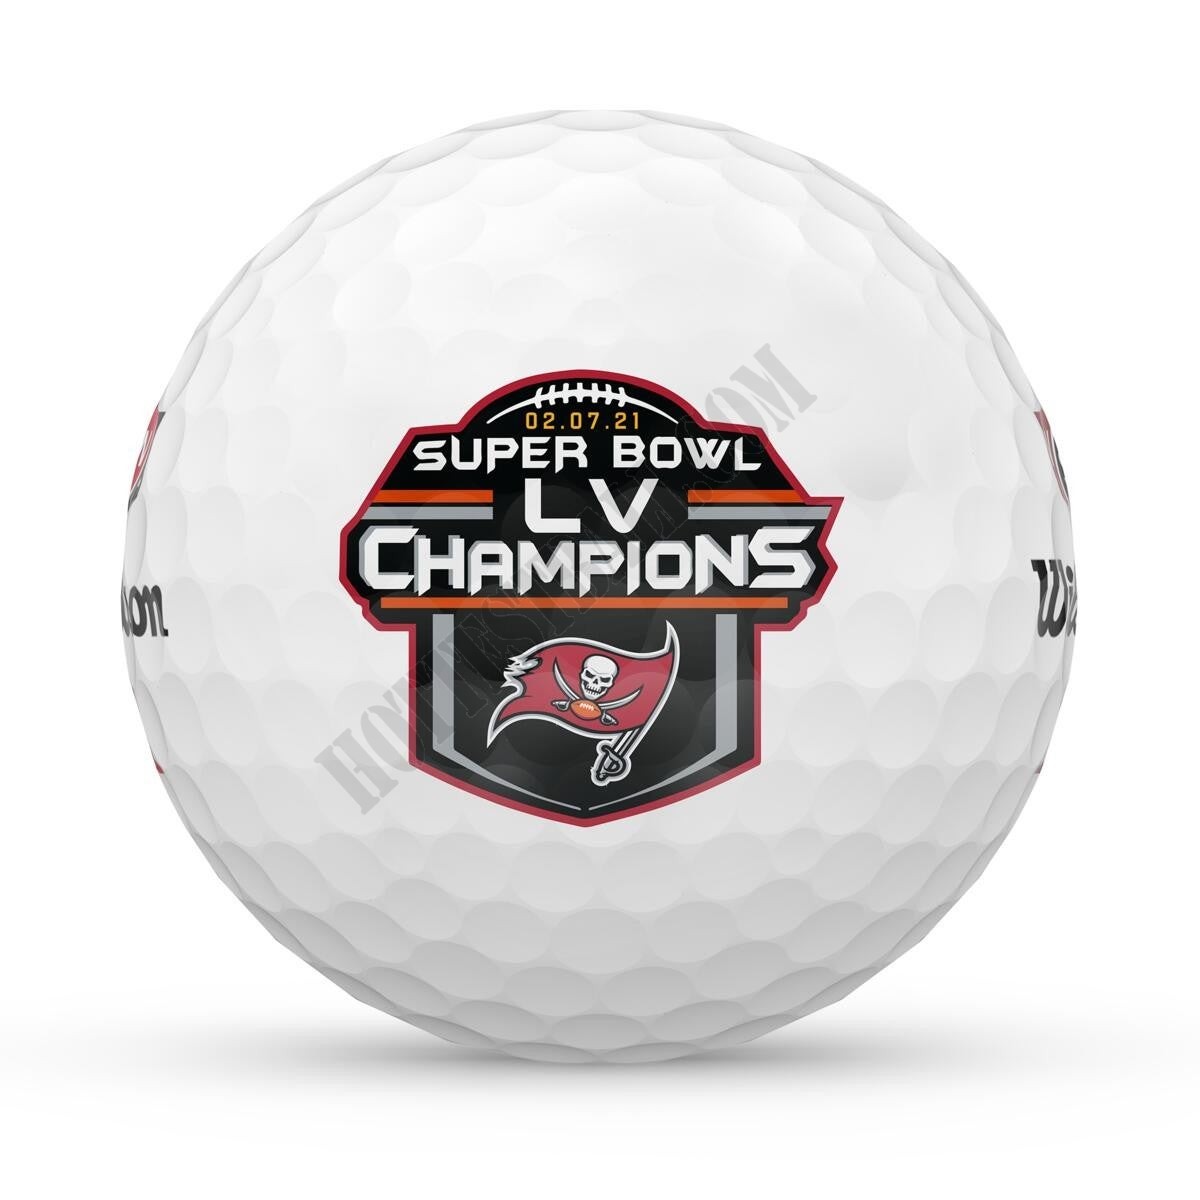 Tampa Bay Buccaneers - DUO Soft+ Super Bowl Championship Golf Balls (12-pack) ● Wilson Promotions - -0